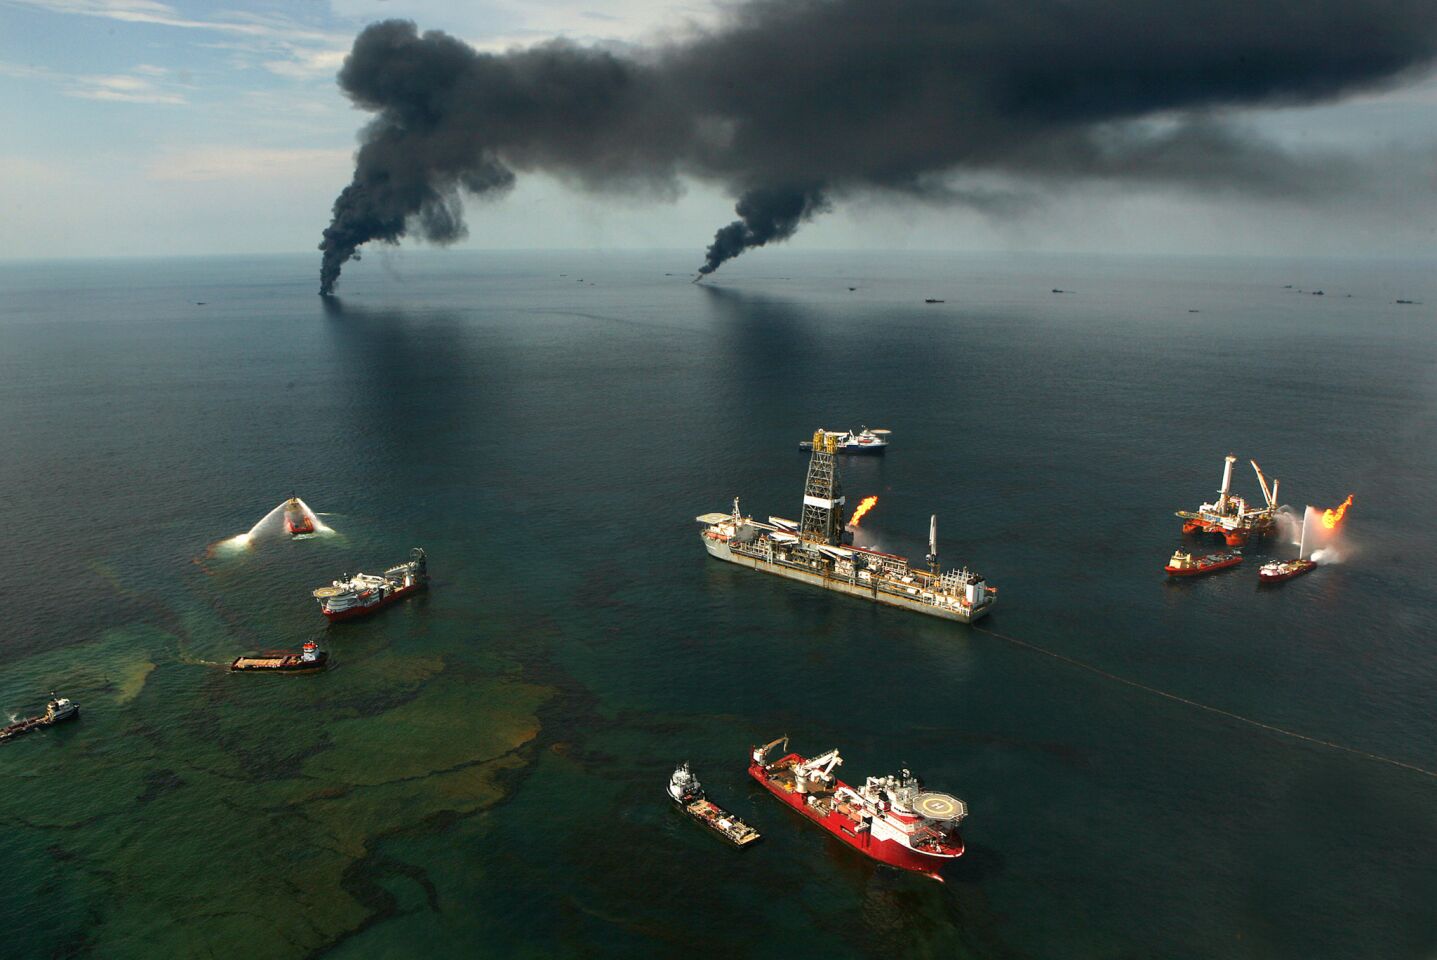 Black smoke rises from pockets of crude being burned in June 2010. Controlled burns removed 11.14 million gallons of oil, The Times found.